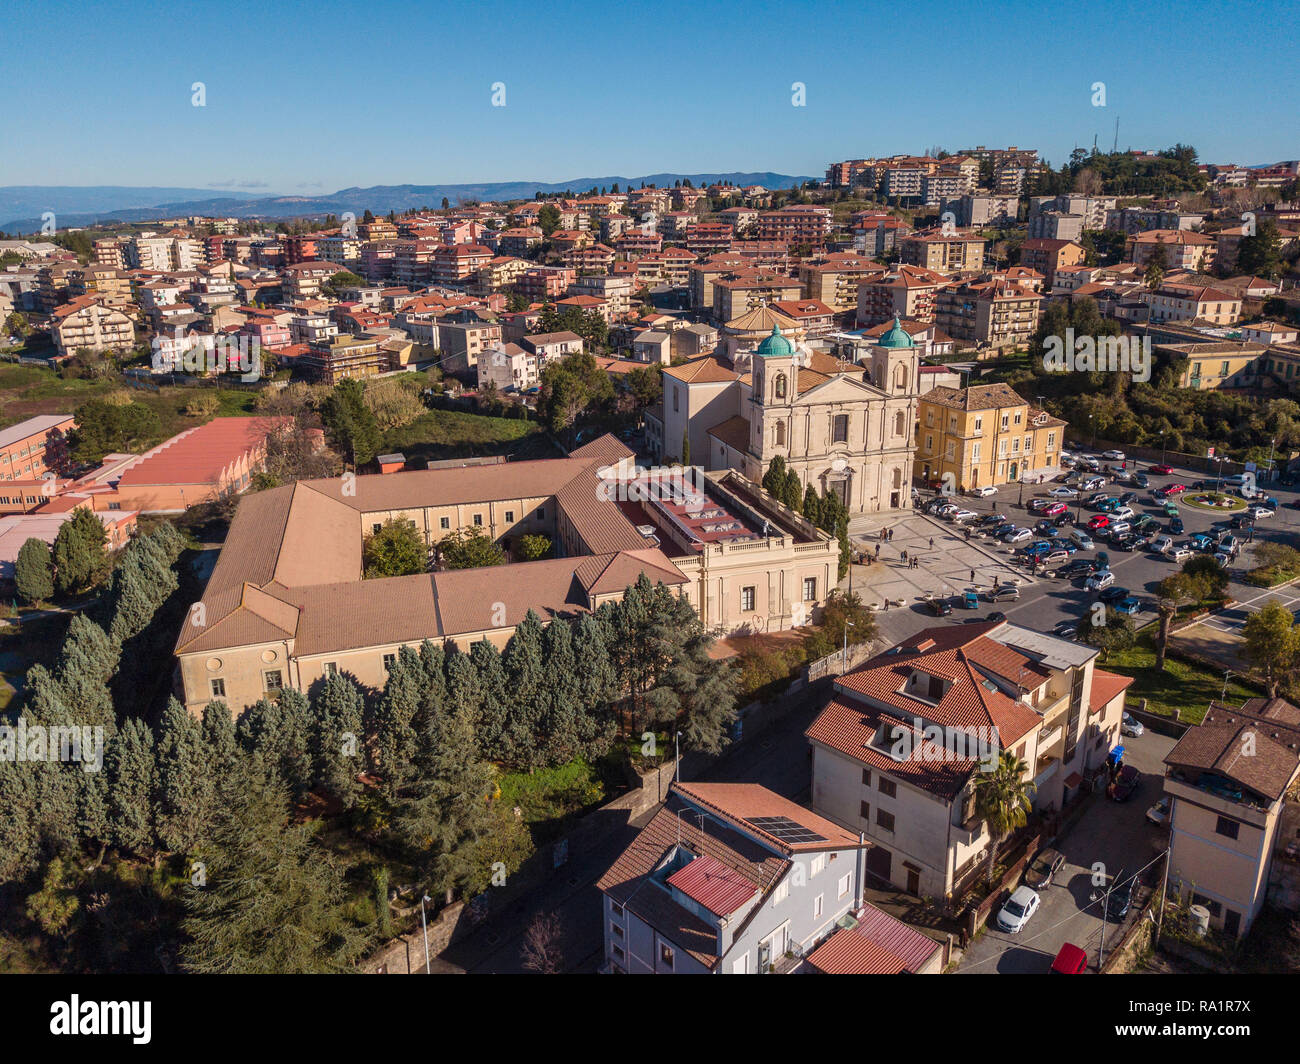 Aerial view of the Cathedral square of Santa Maria Maggiore, San Leoluca, municipal park, houses and roofs, urban area, Vibo Valentia, Calabria, Italy Stock Photo